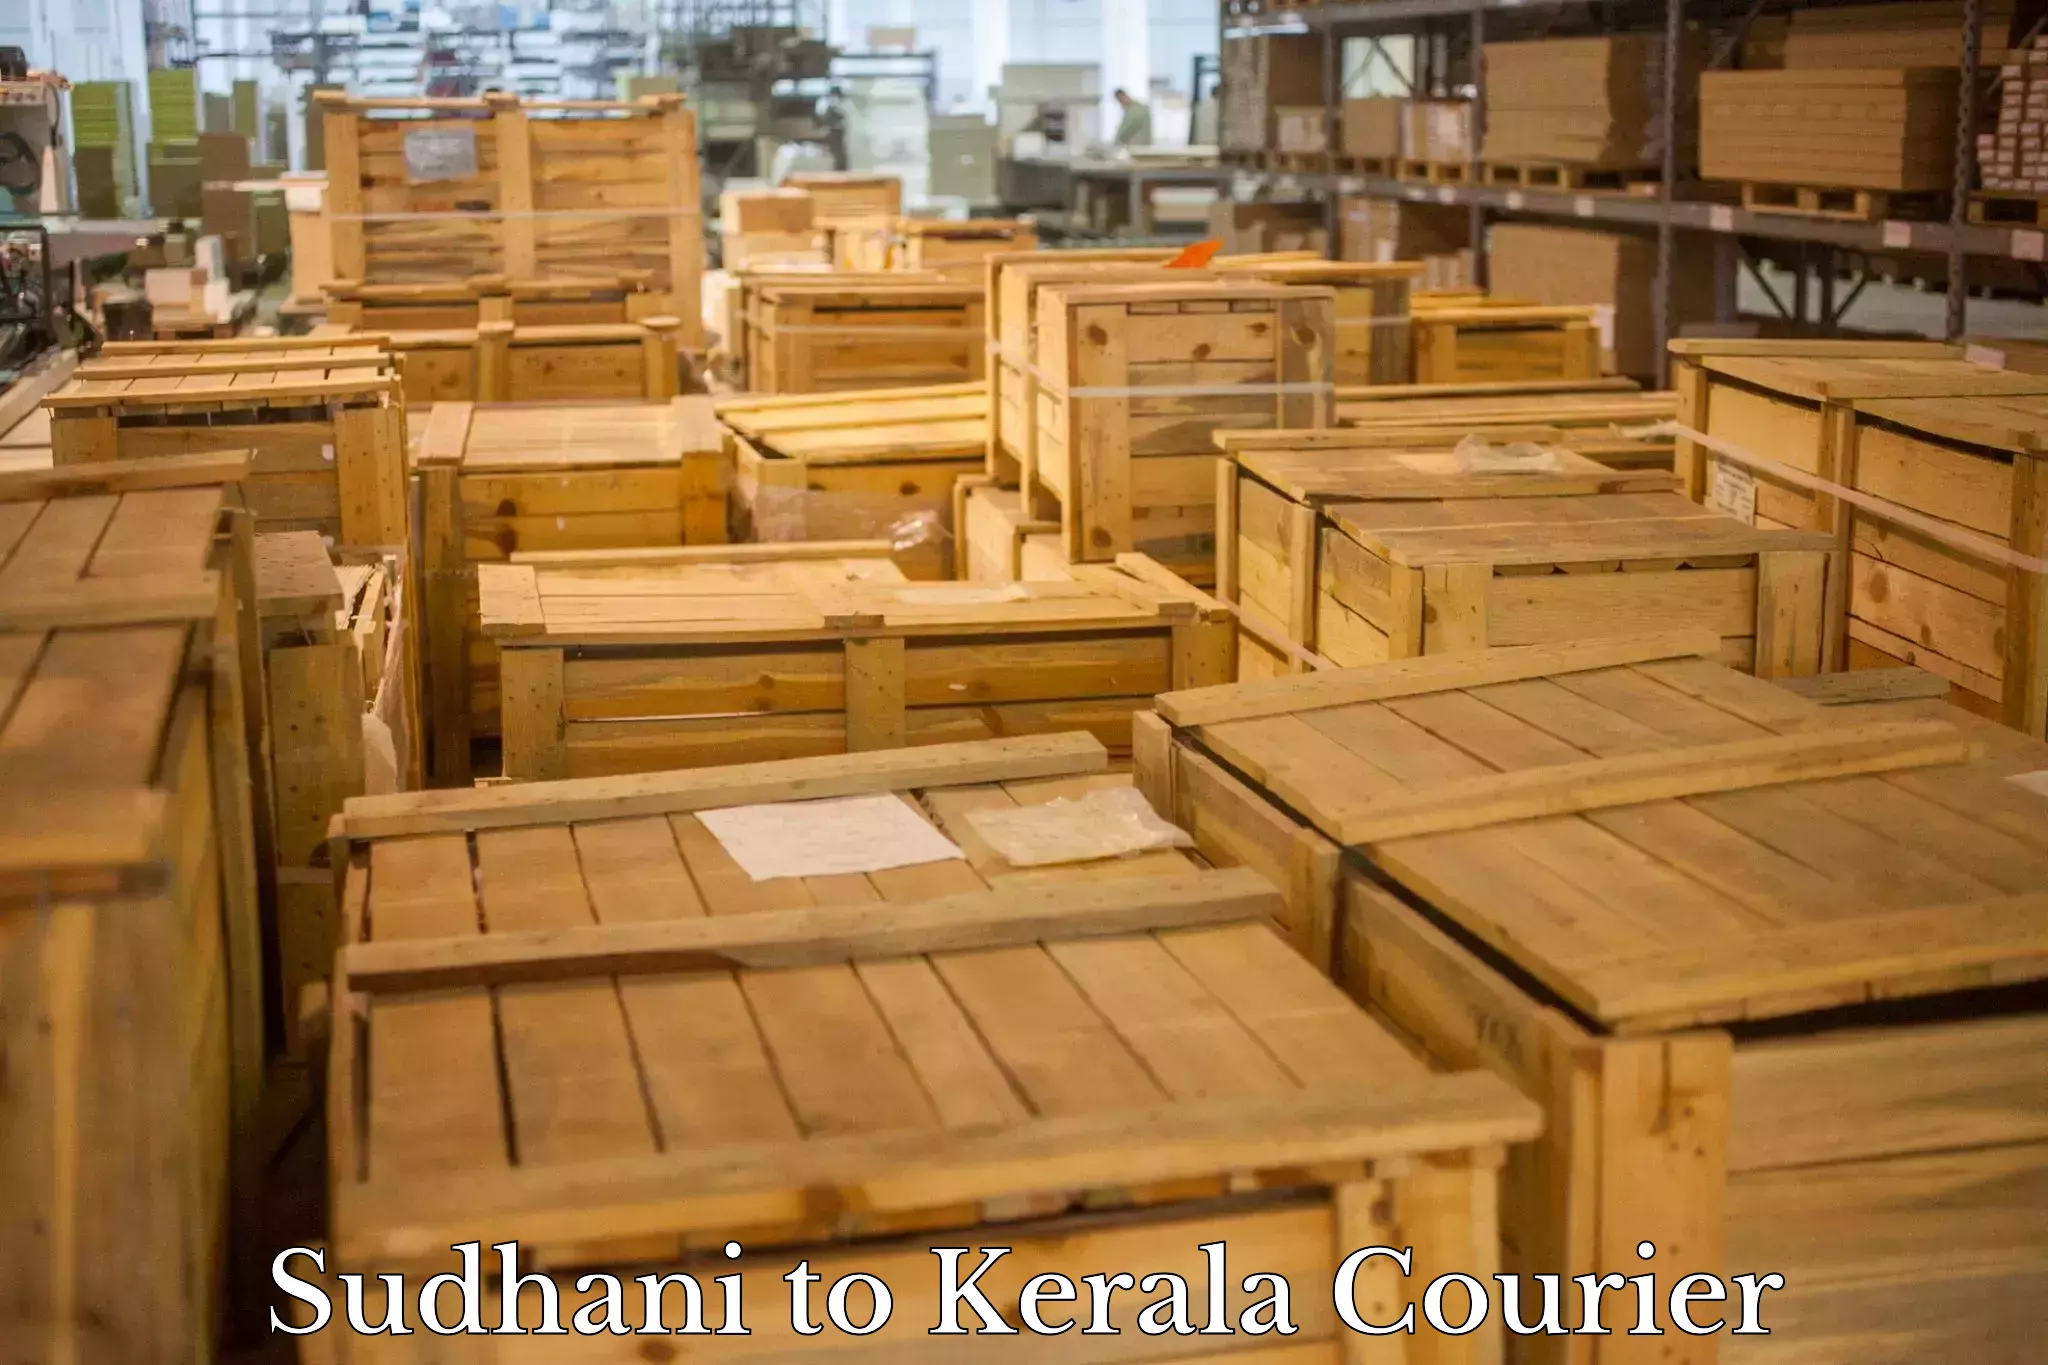 State-of-the-art courier technology Sudhani to Kerala